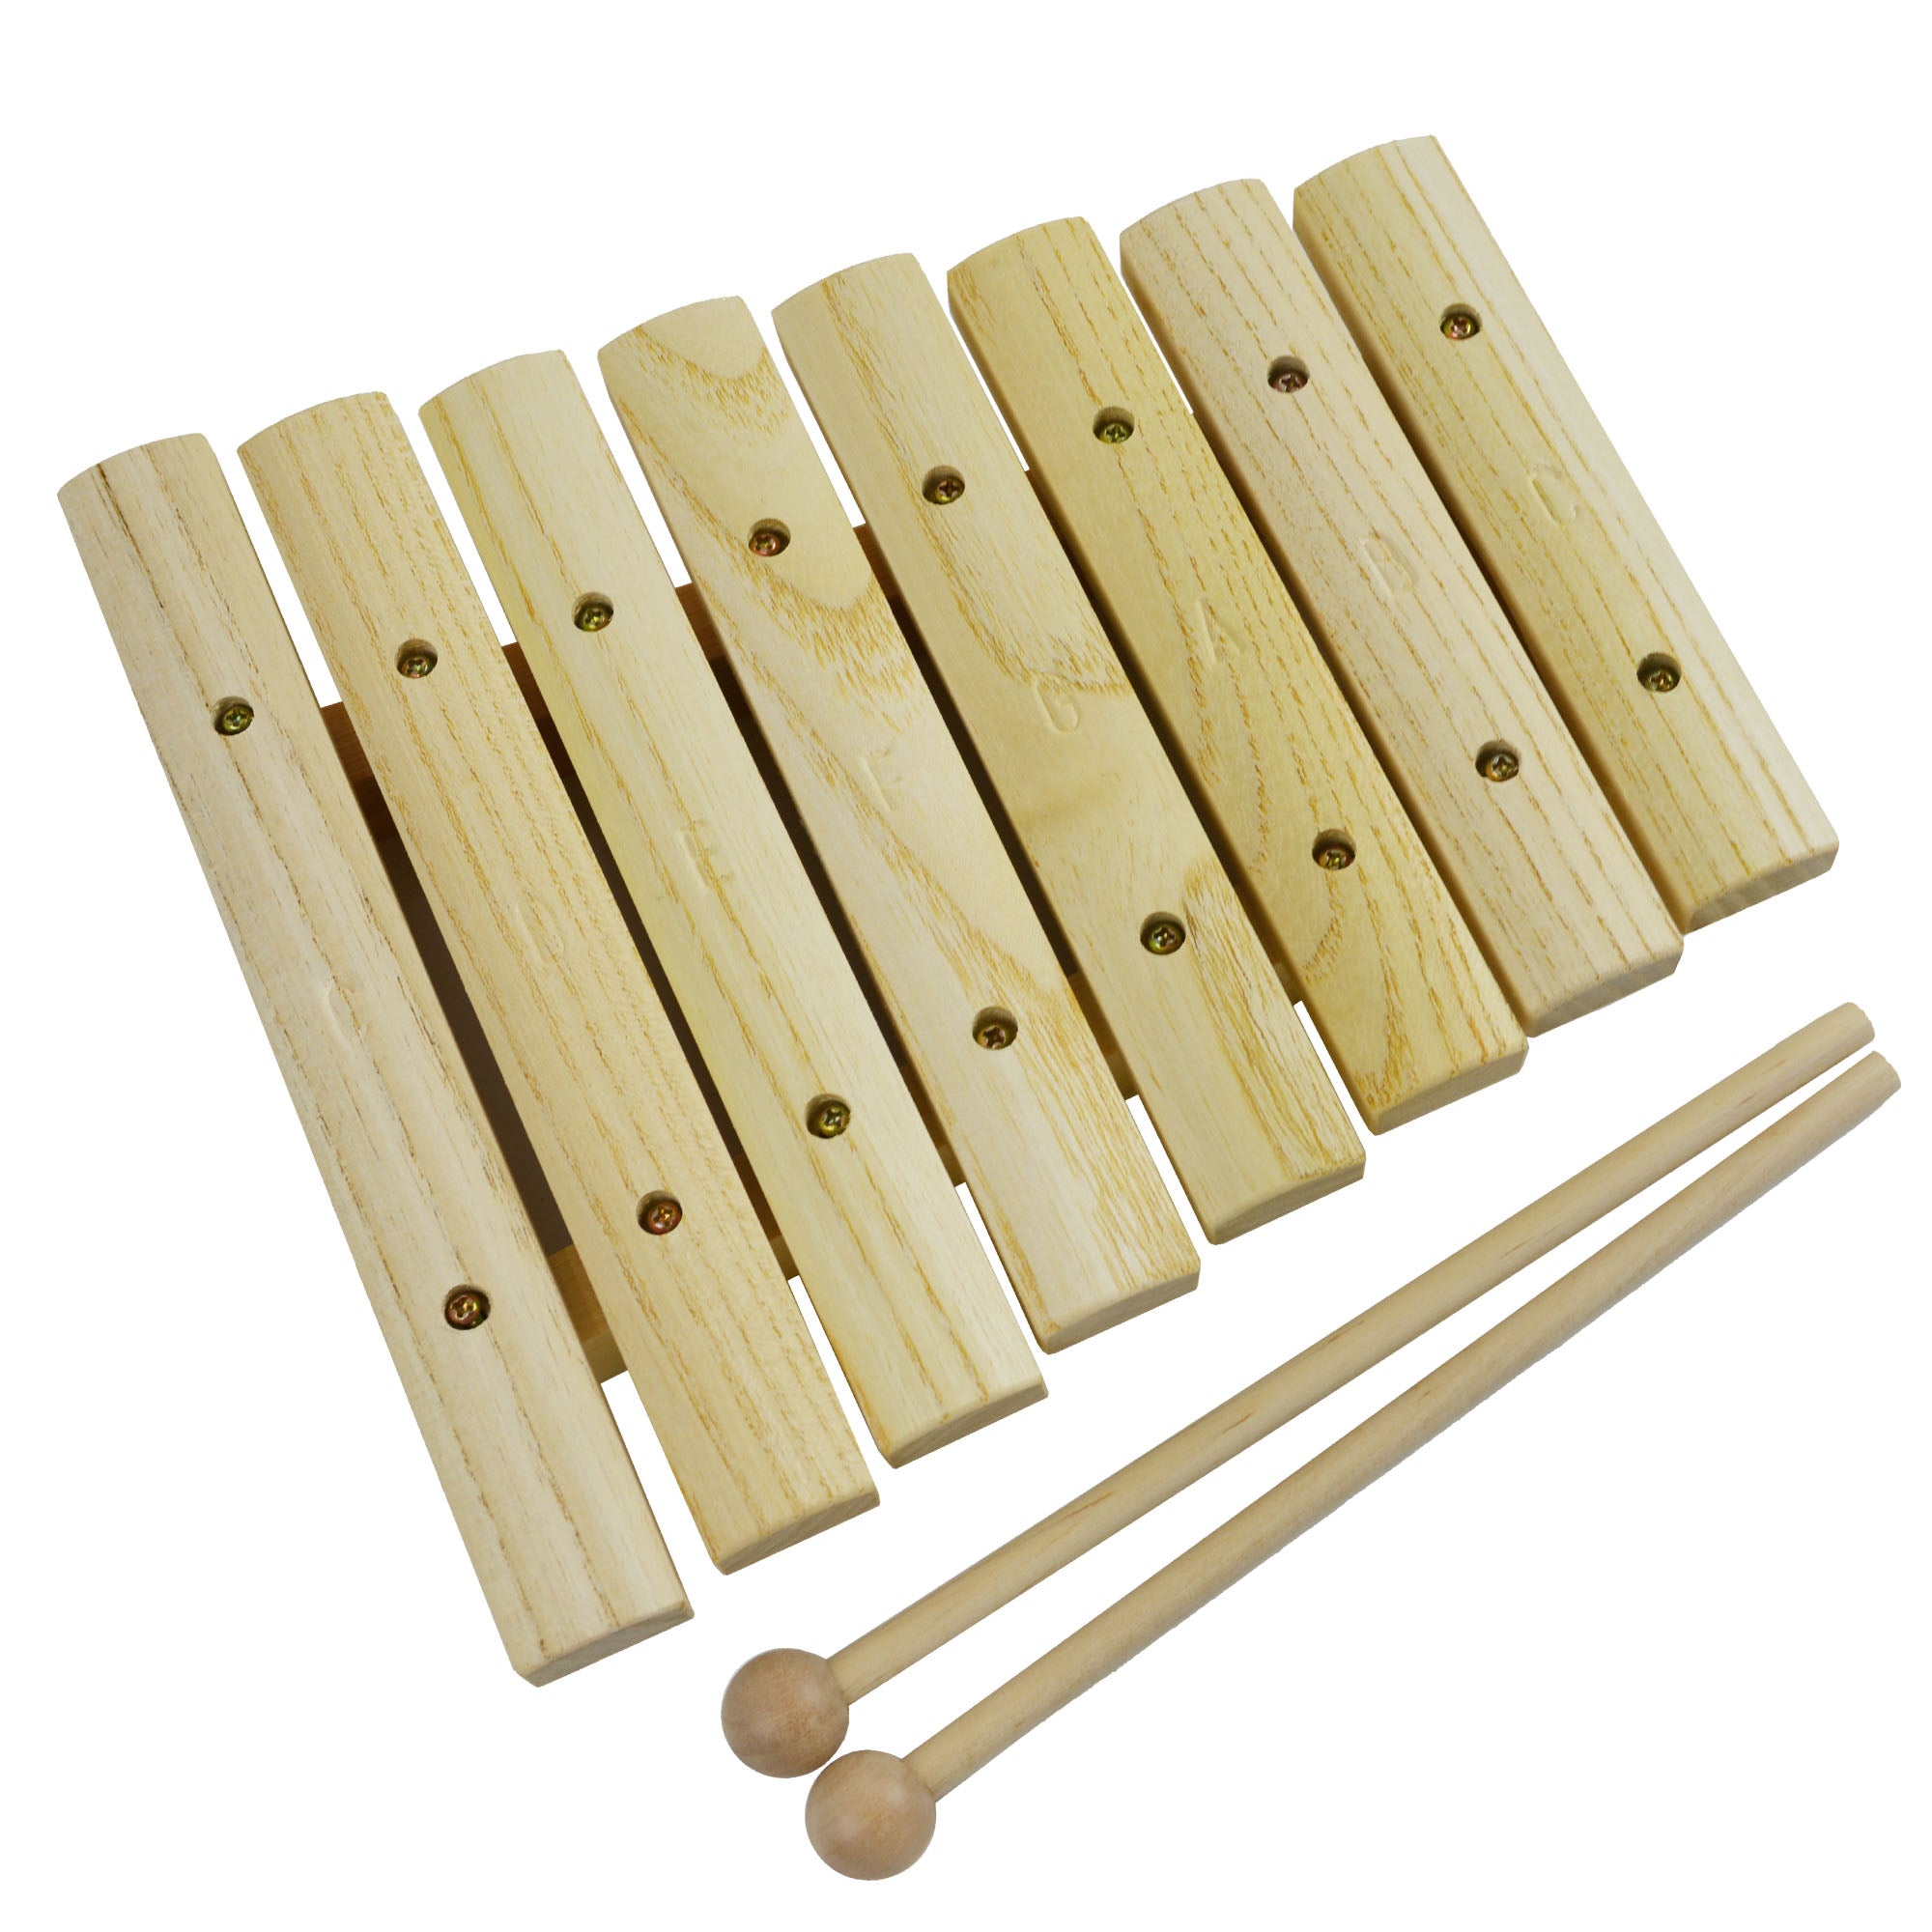 Wood Xylophone, 8 Note - Music is Elementary